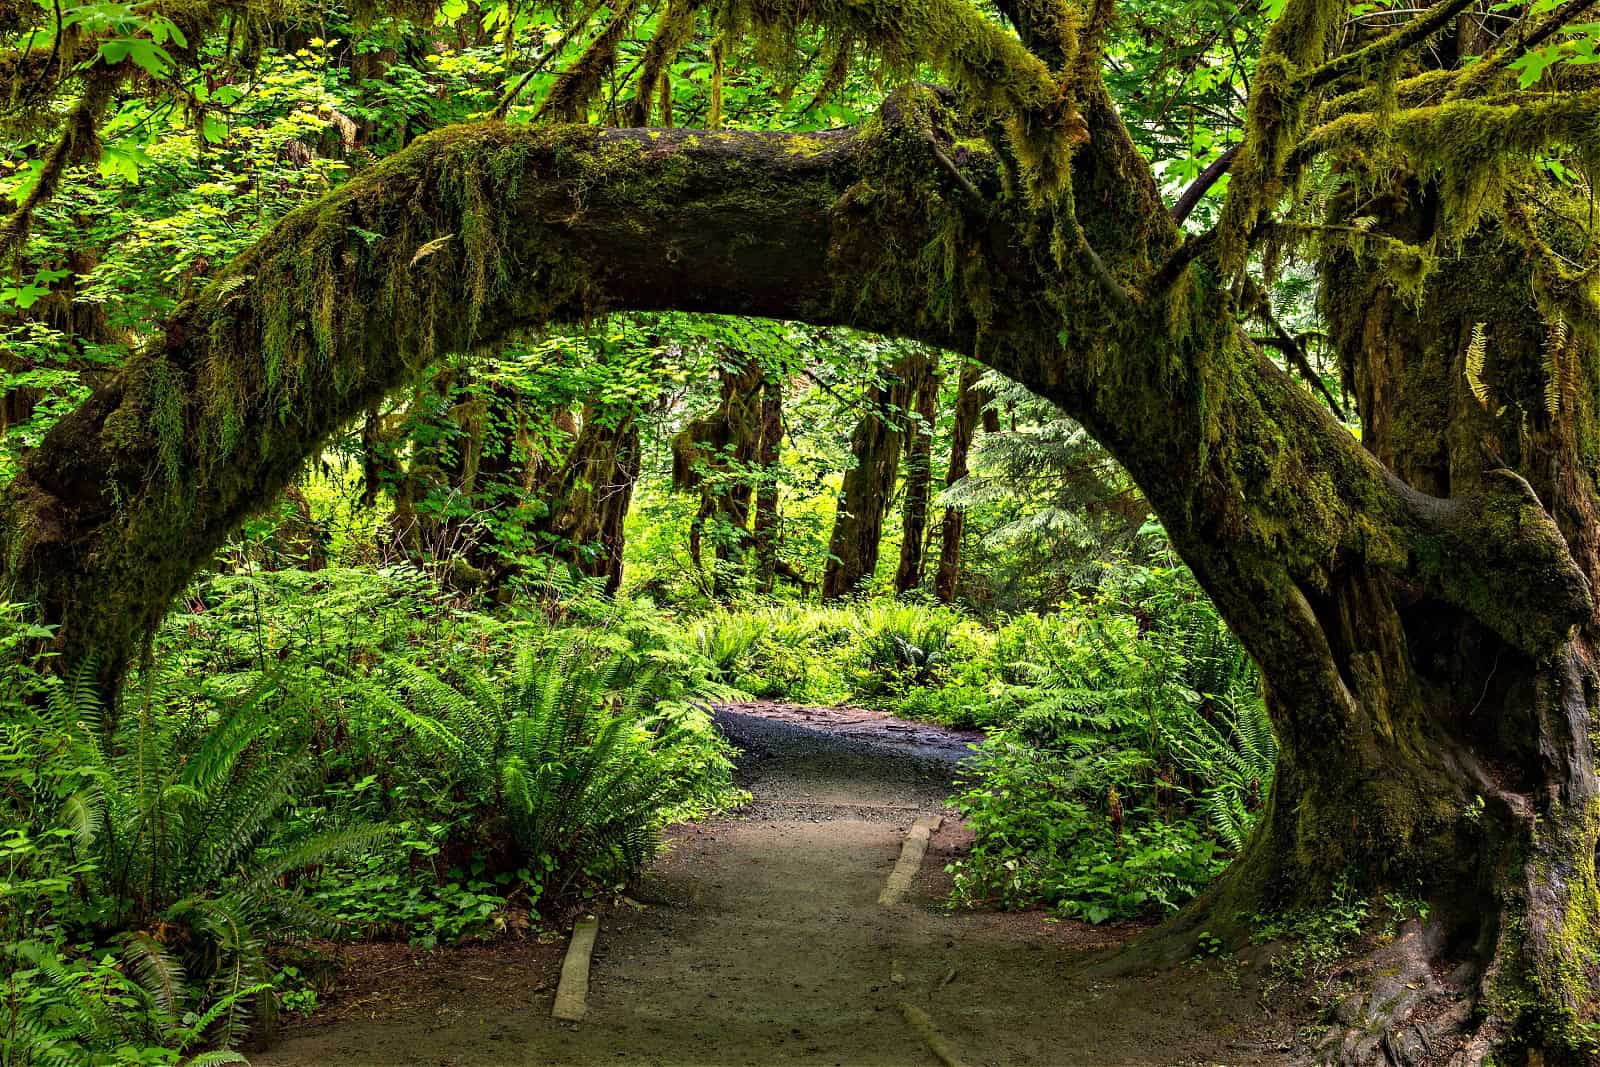 A moss-covered tree arches over a footpath in the beautiful, lush, green rainforest in Olympic National Park in Washington state